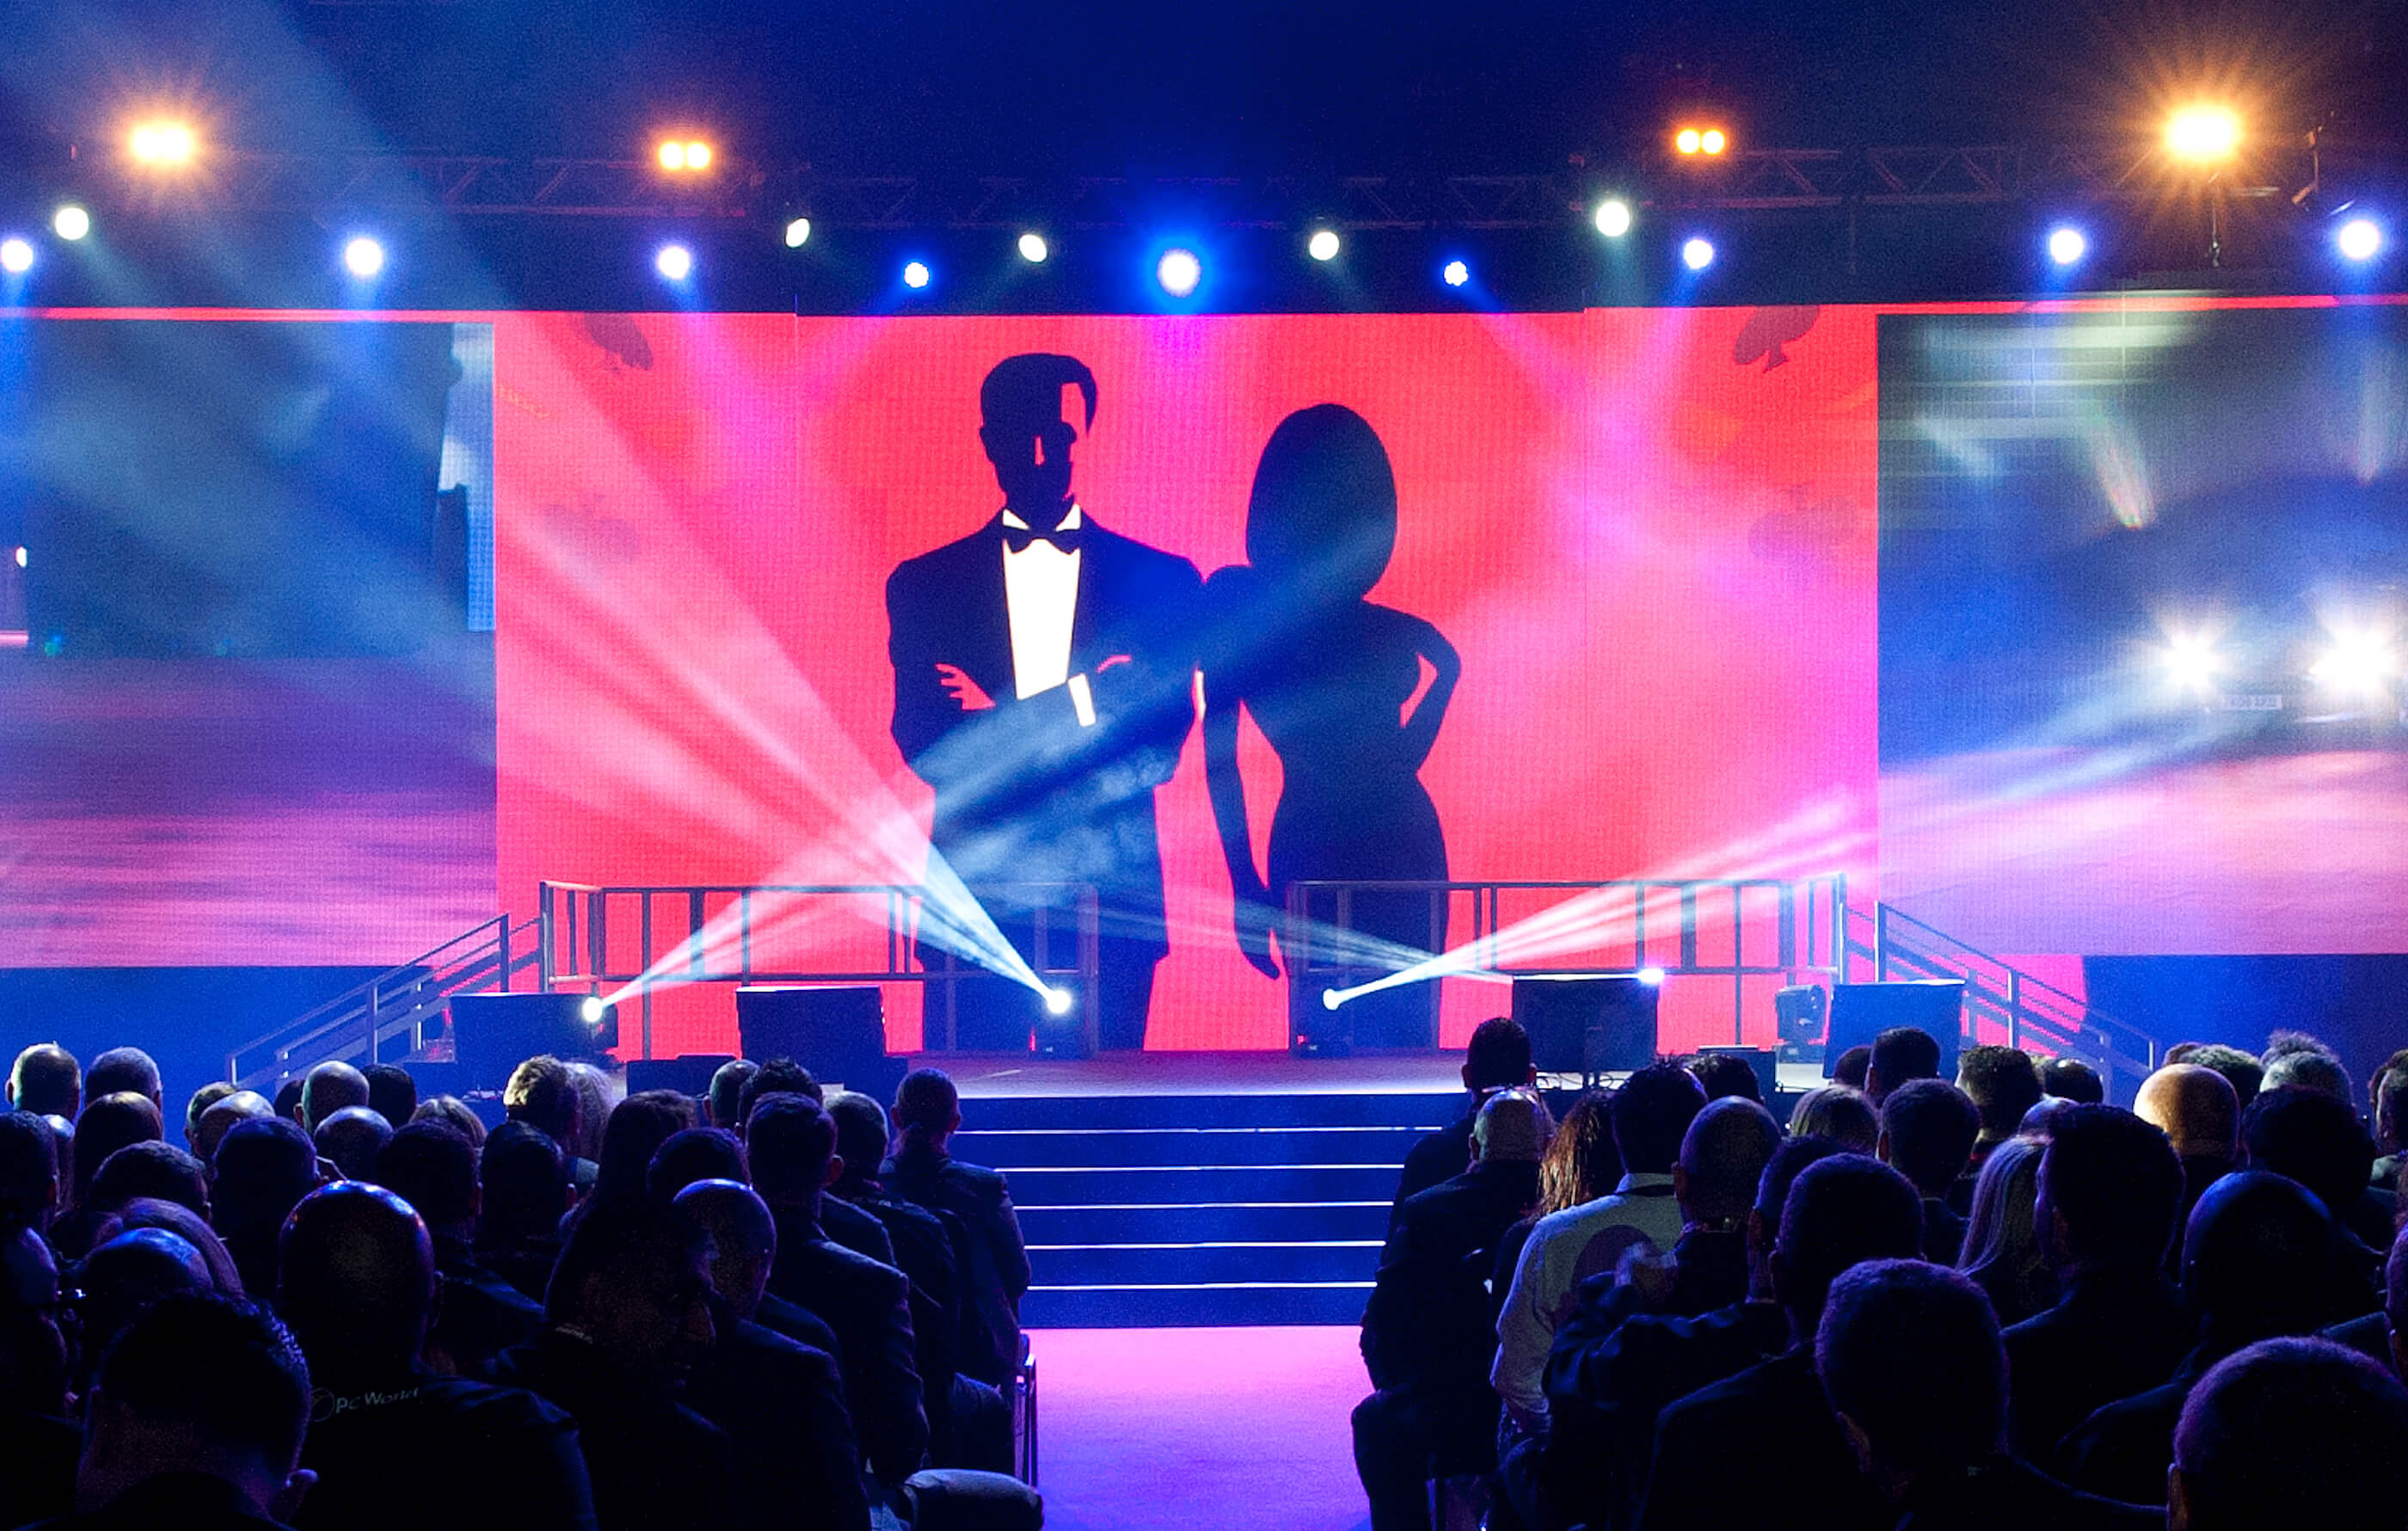 Photo from the event, taken from the back of the room facing the stage. The audience sit facing a red digital backdrop, with illustrations of a male and female silhouette in the centre